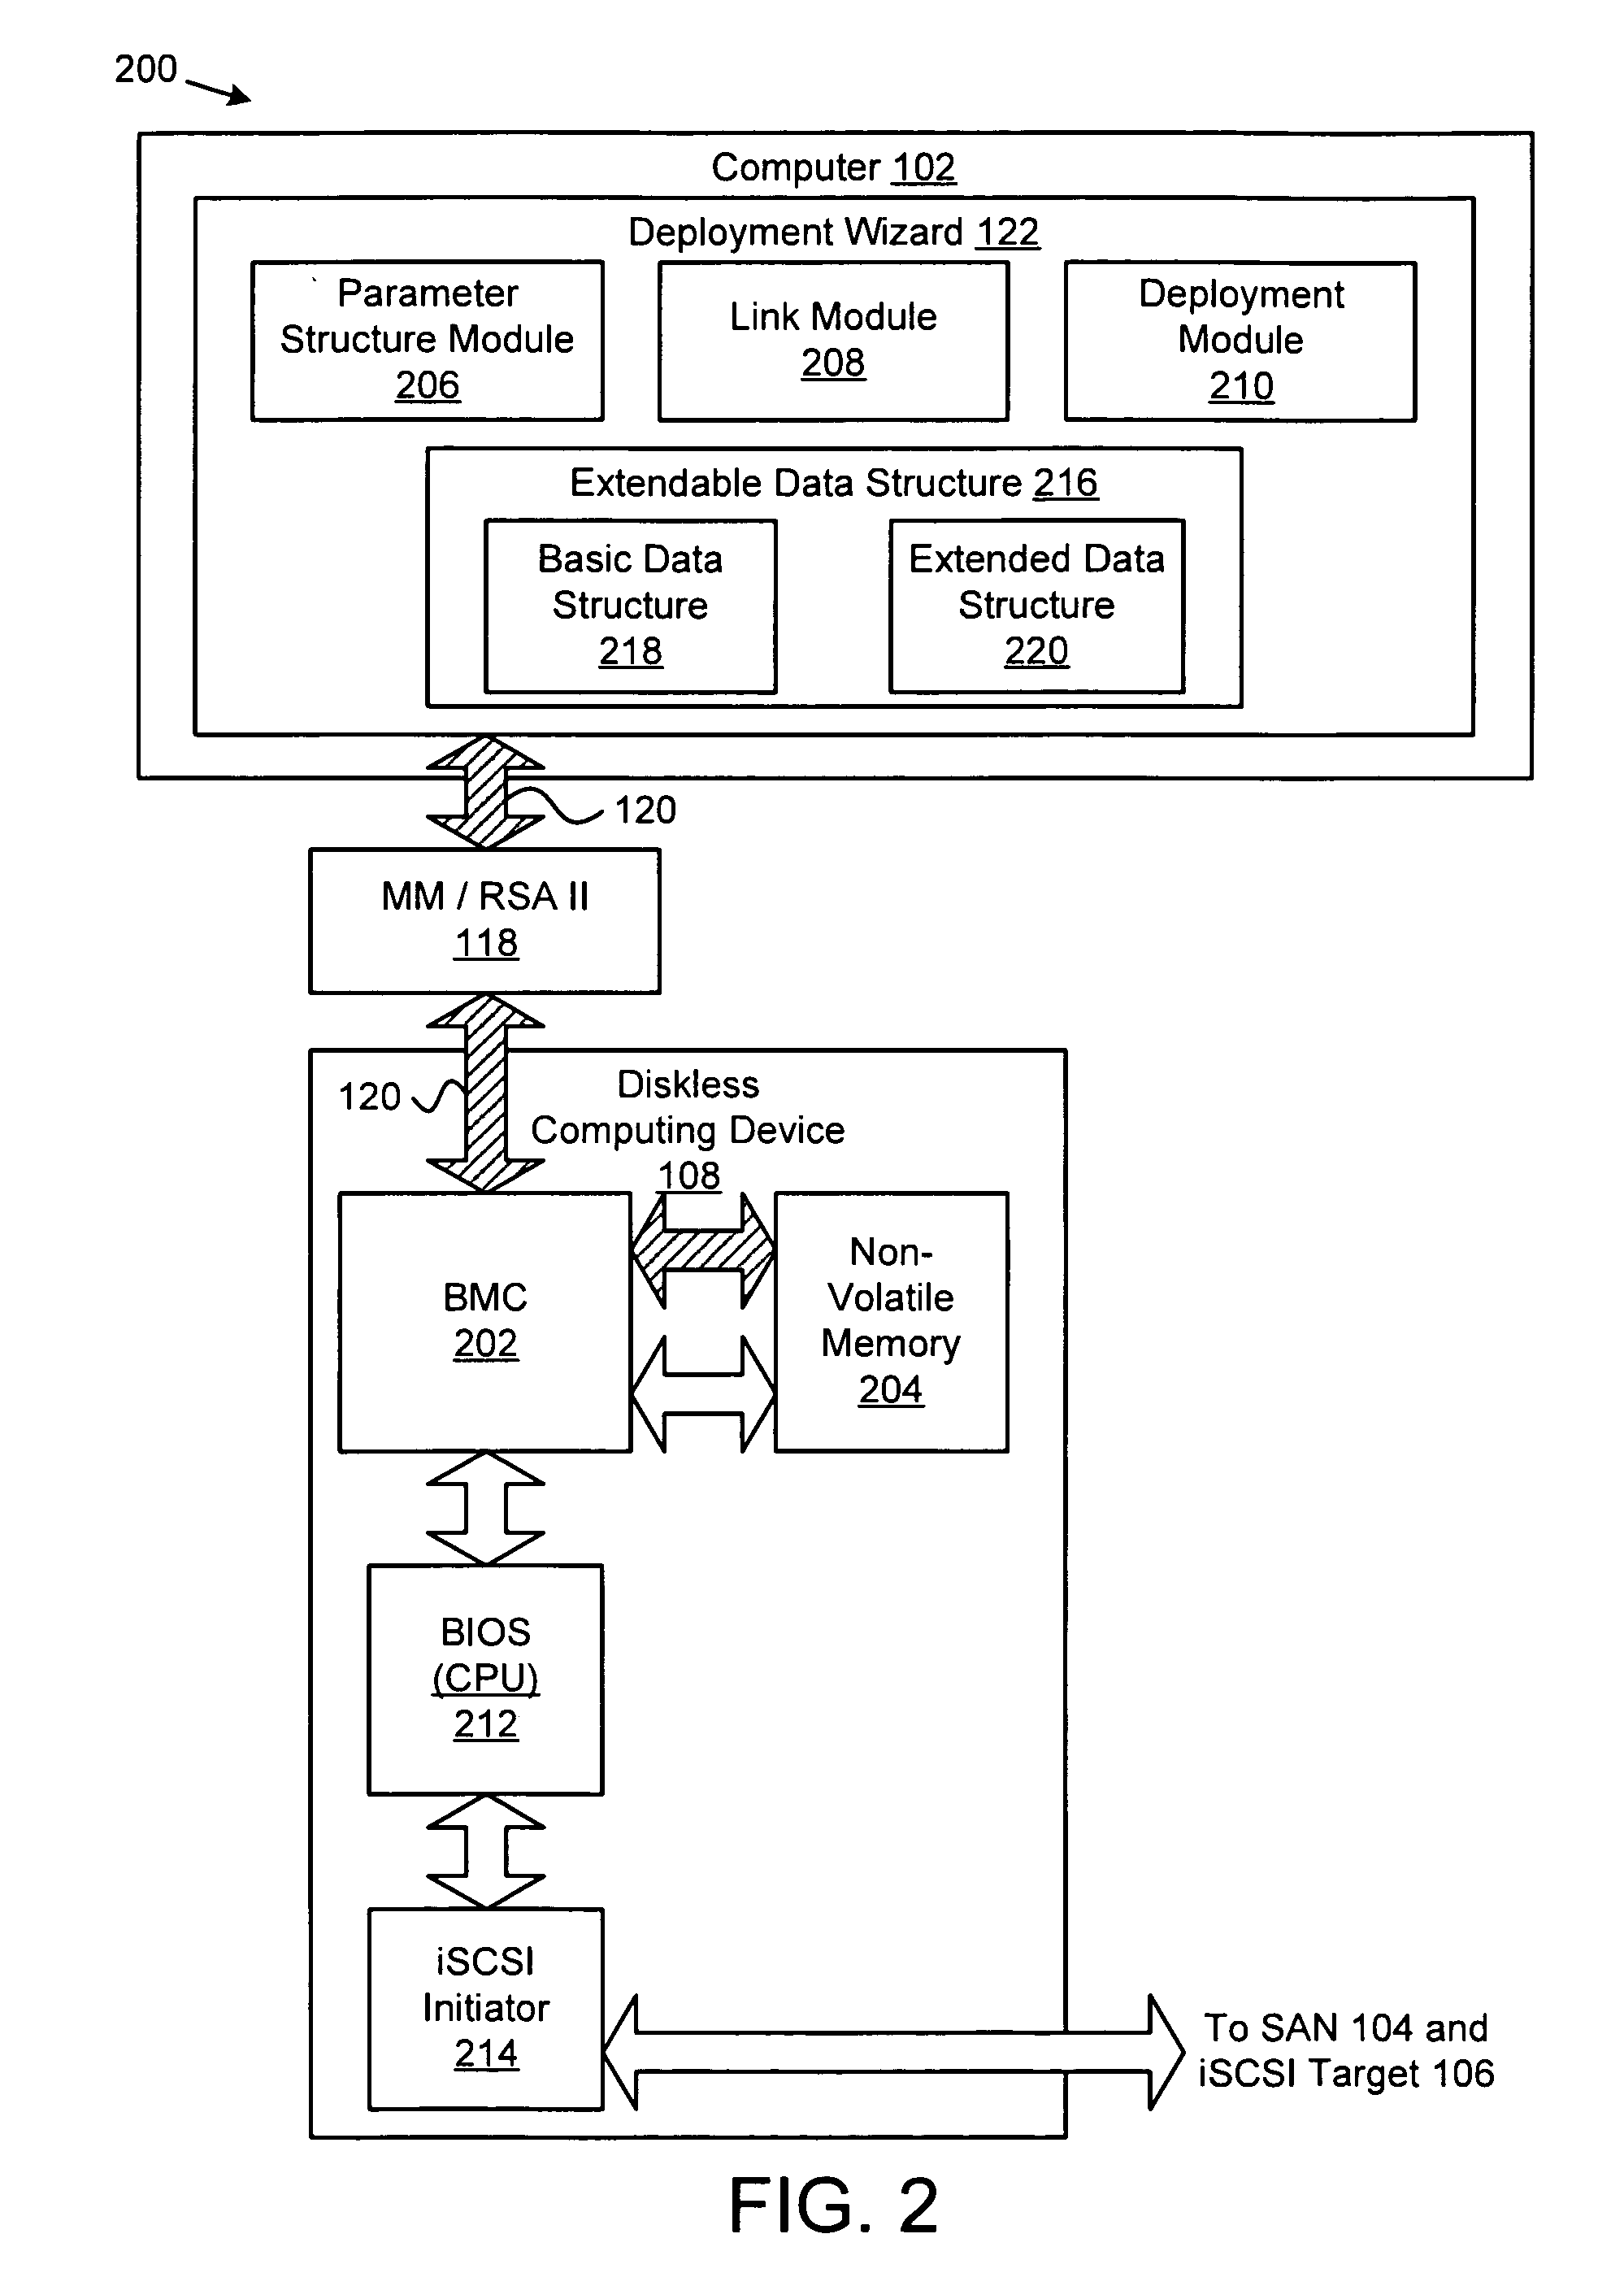 Apparatus, system, and method for deploying iSCSI parameters to a diskless computing device